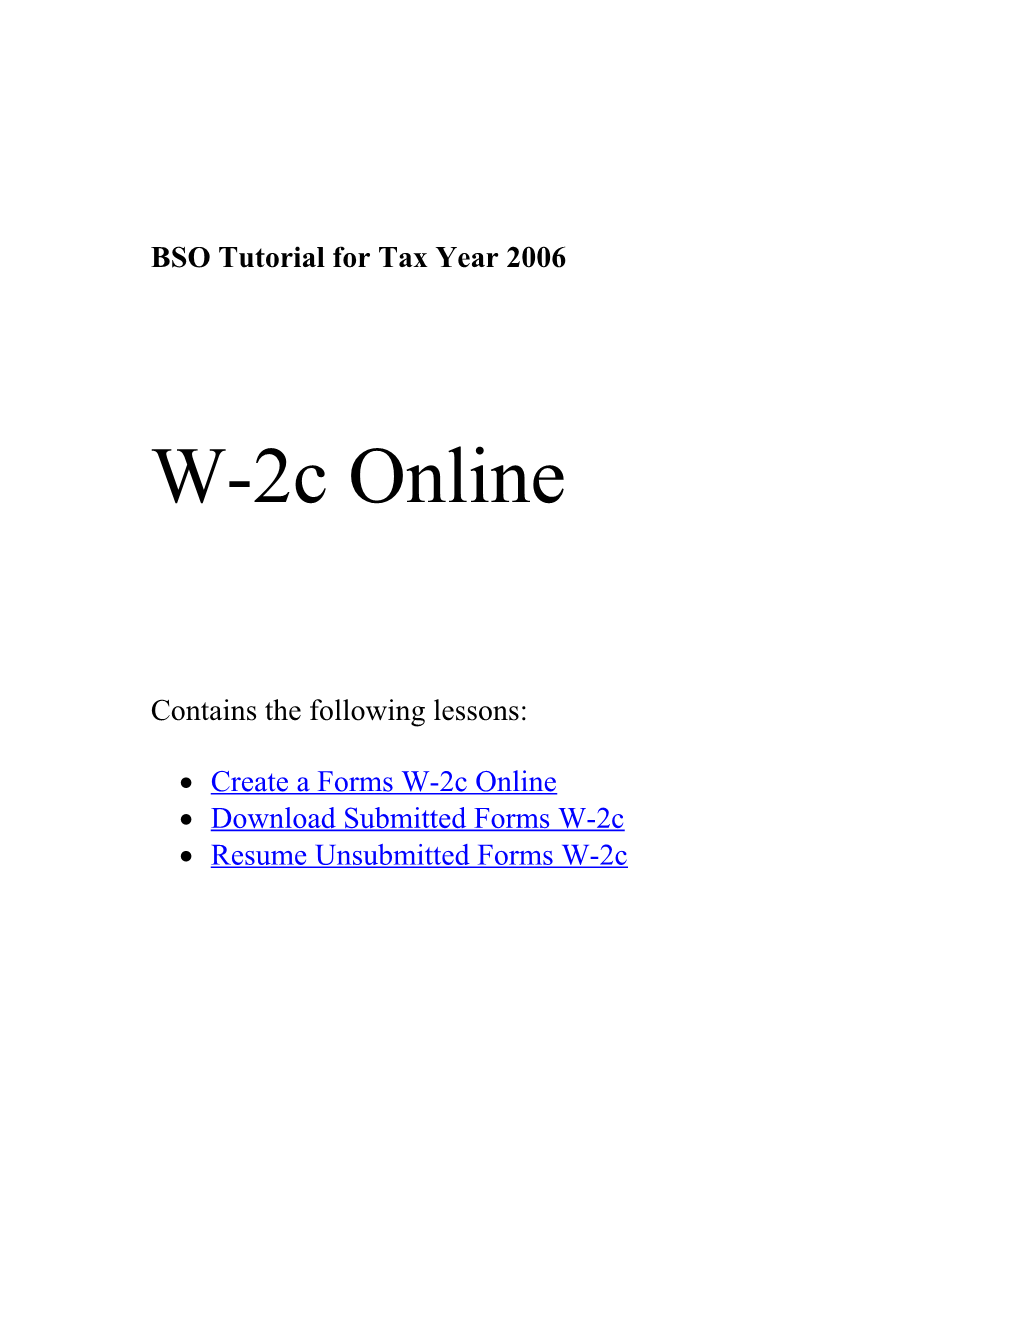 BSO Tutorial for Tax Year 2006